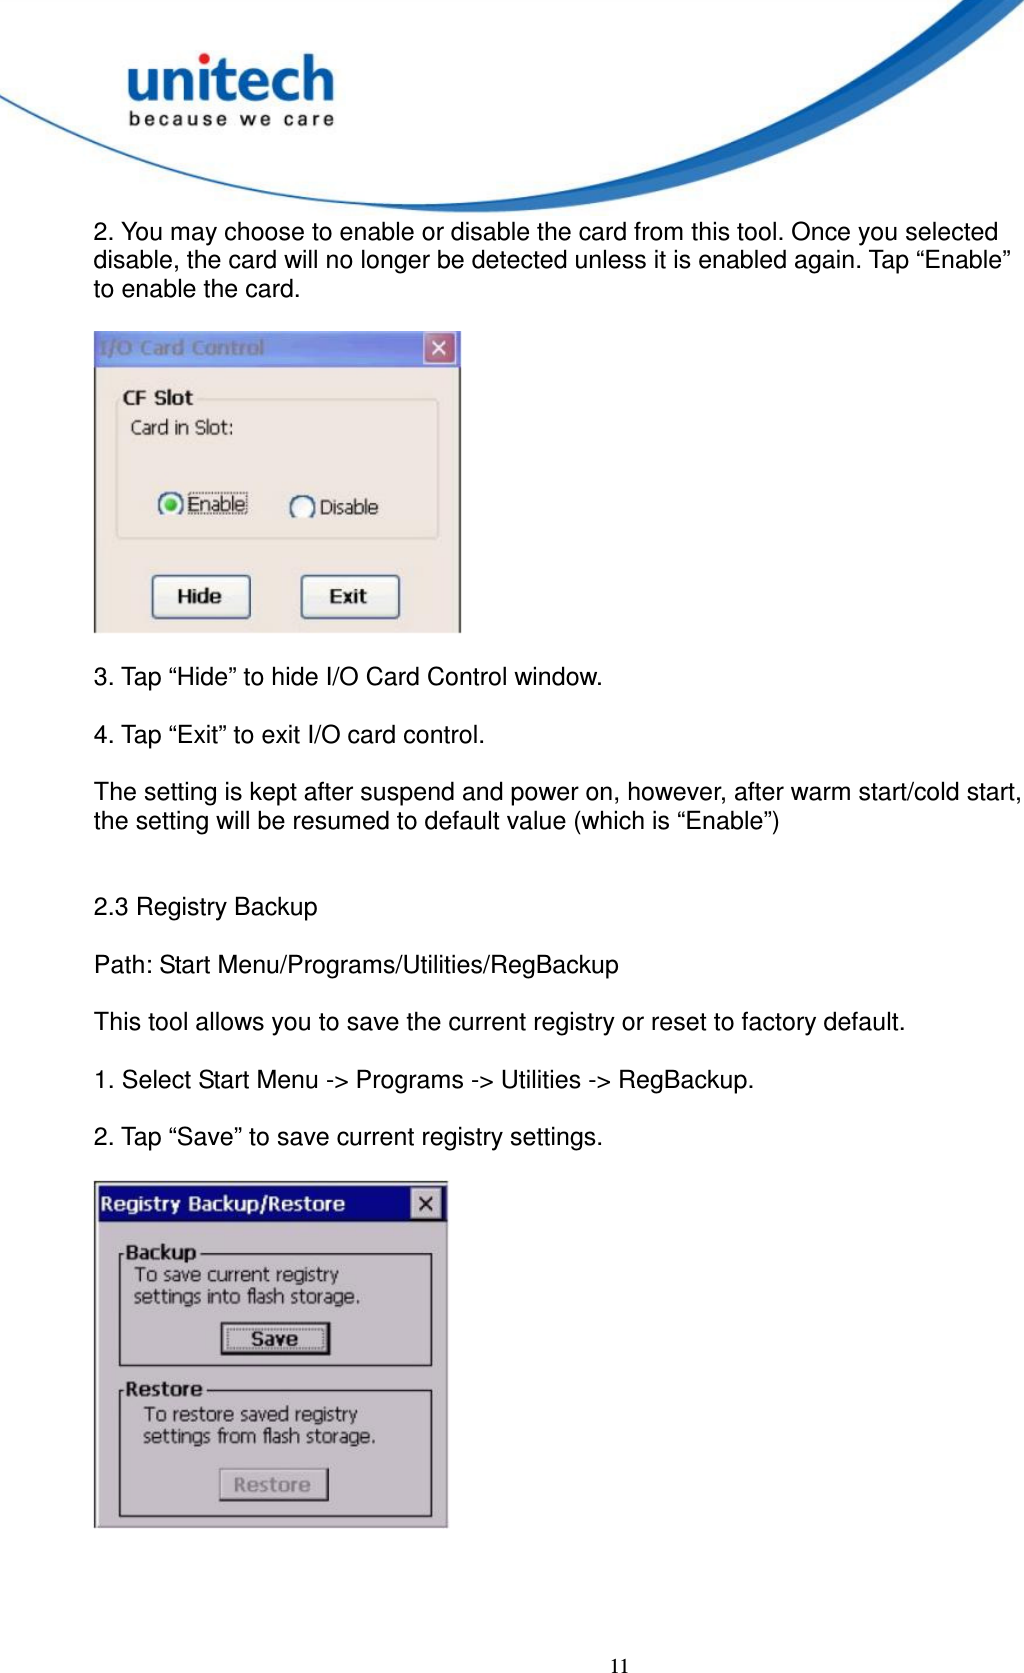  11 2. You may choose to enable or disable the card from this tool. Once you selected   disable, the card will no longer be detected unless it is enabled again. Tap “Enable”   to enable the card.    3. Tap “Hide” to hide I/O Card Control window.        4. Tap “Exit” to exit I/O card control.      The setting is kept after suspend and power on, however, after warm start/cold start,   the setting will be resumed to default value (which is “Enable”)   2.3 Registry Backup      Path: Start Menu/Programs/Utilities/RegBackup      This tool allows you to save the current registry or reset to factory default.      1. Select Start Menu -&gt; Programs -&gt; Utilities -&gt; RegBackup.      2. Tap “Save” to save current registry settings.       